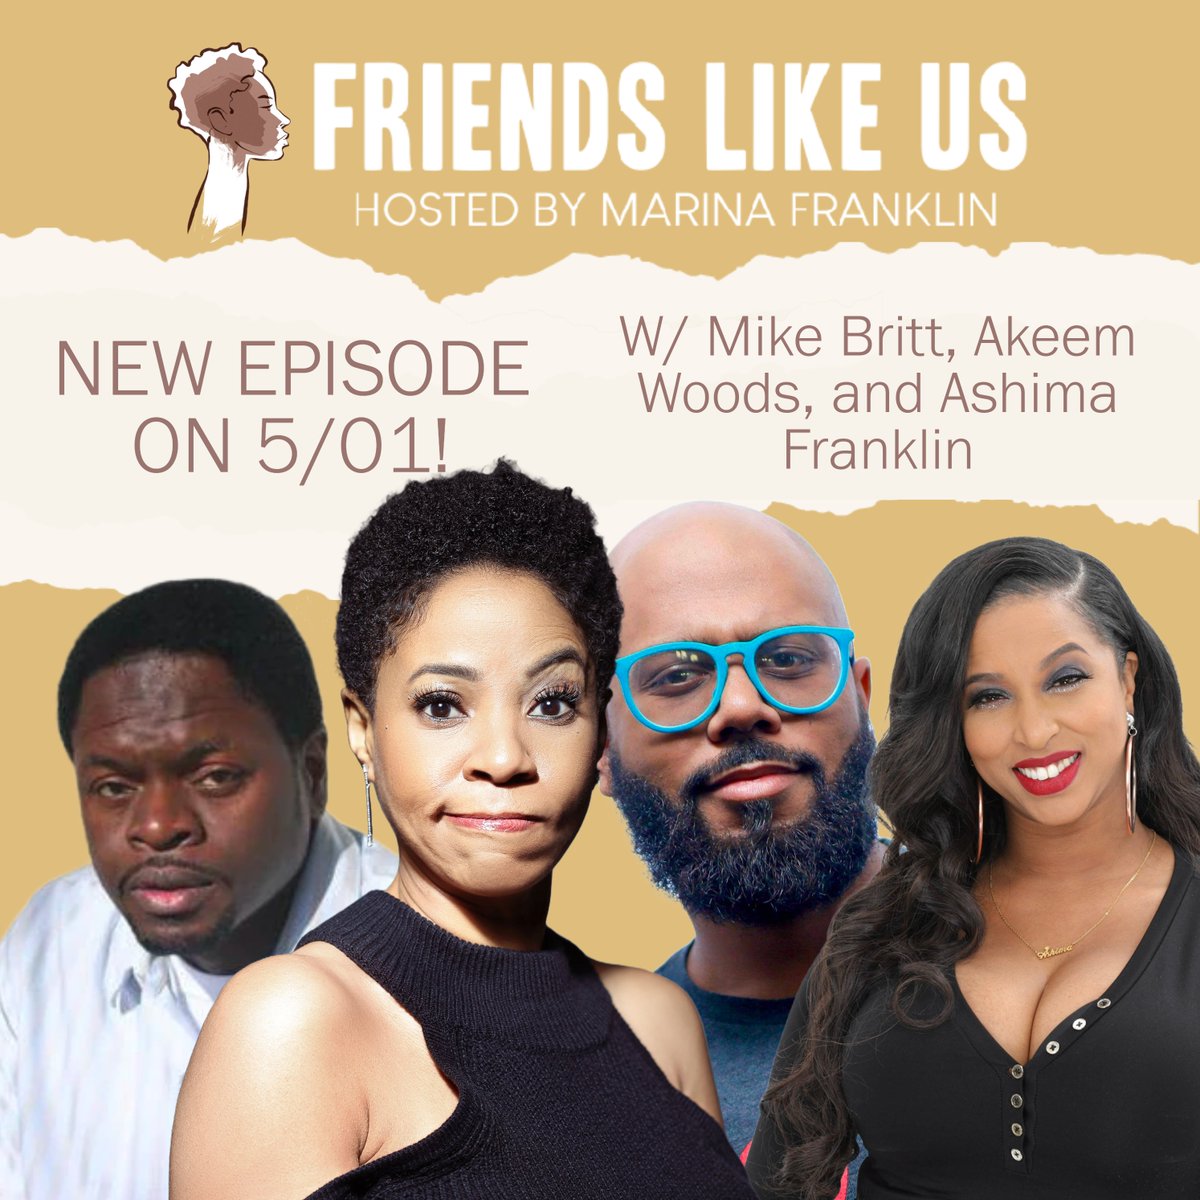 NEW CONTENT ALERT! A new episode of Friends Like Us with host @marinayfranklin and fabulous friends @MIKEBRITTBK @WoodsAkeem @AshimaFranklin is coming out on 5/01! #CheckUsOut #FriendsLikeUs and #subscribe here: ow.ly/13YS50JqNJv